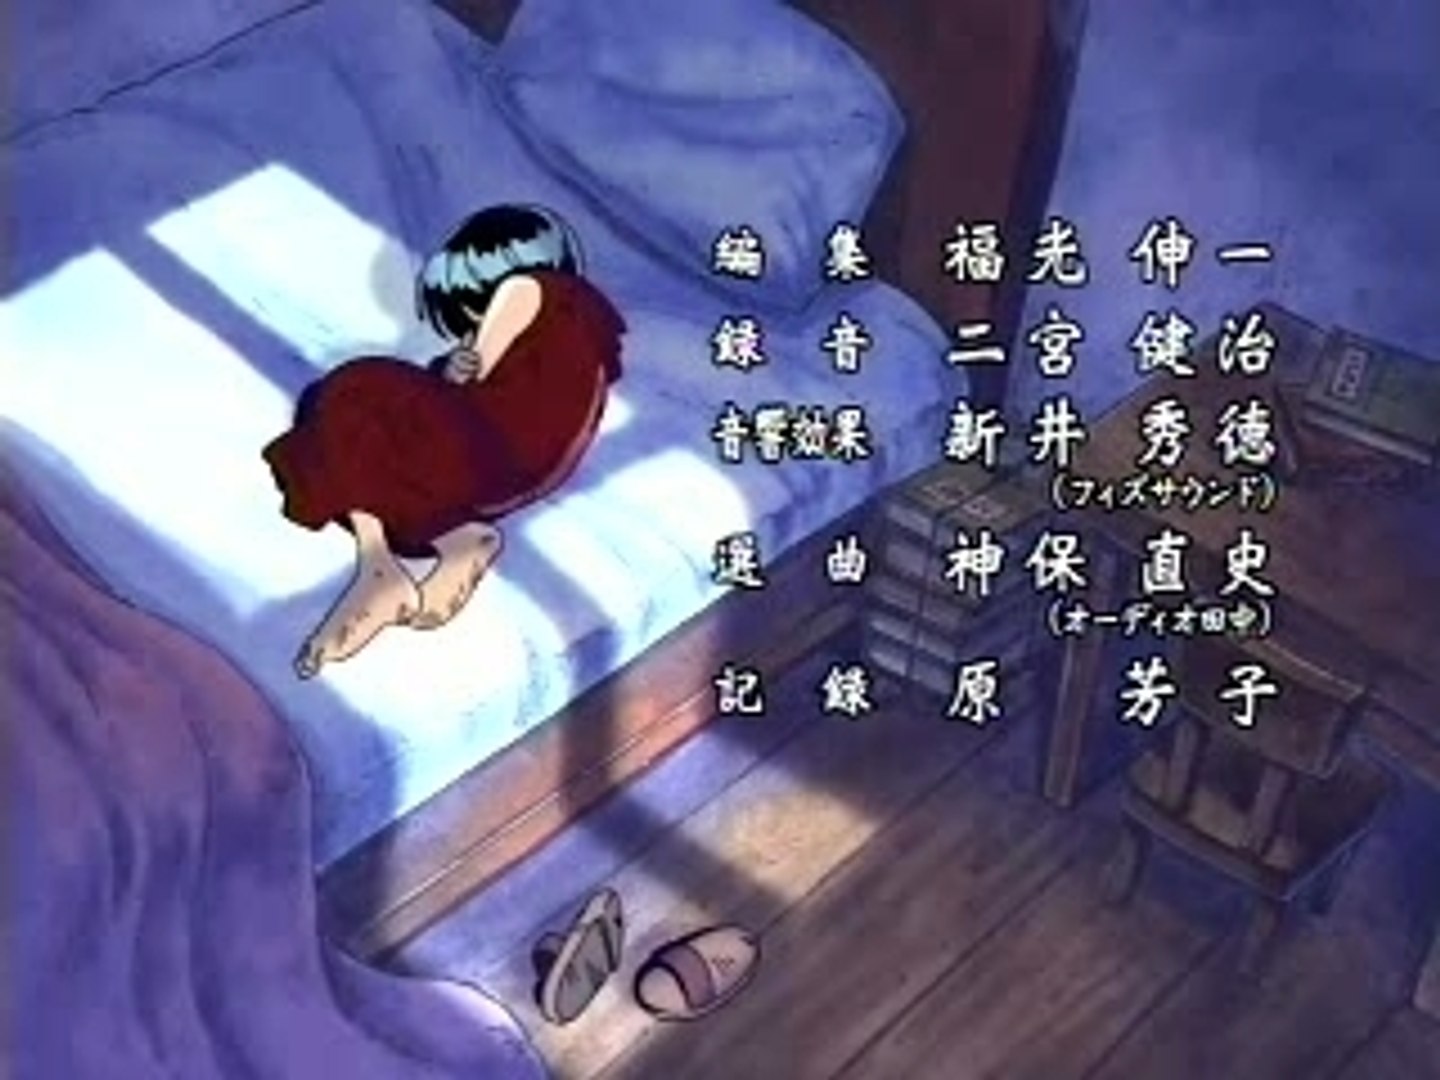 One Piece Ending 09 Free Will Video Dailymotion